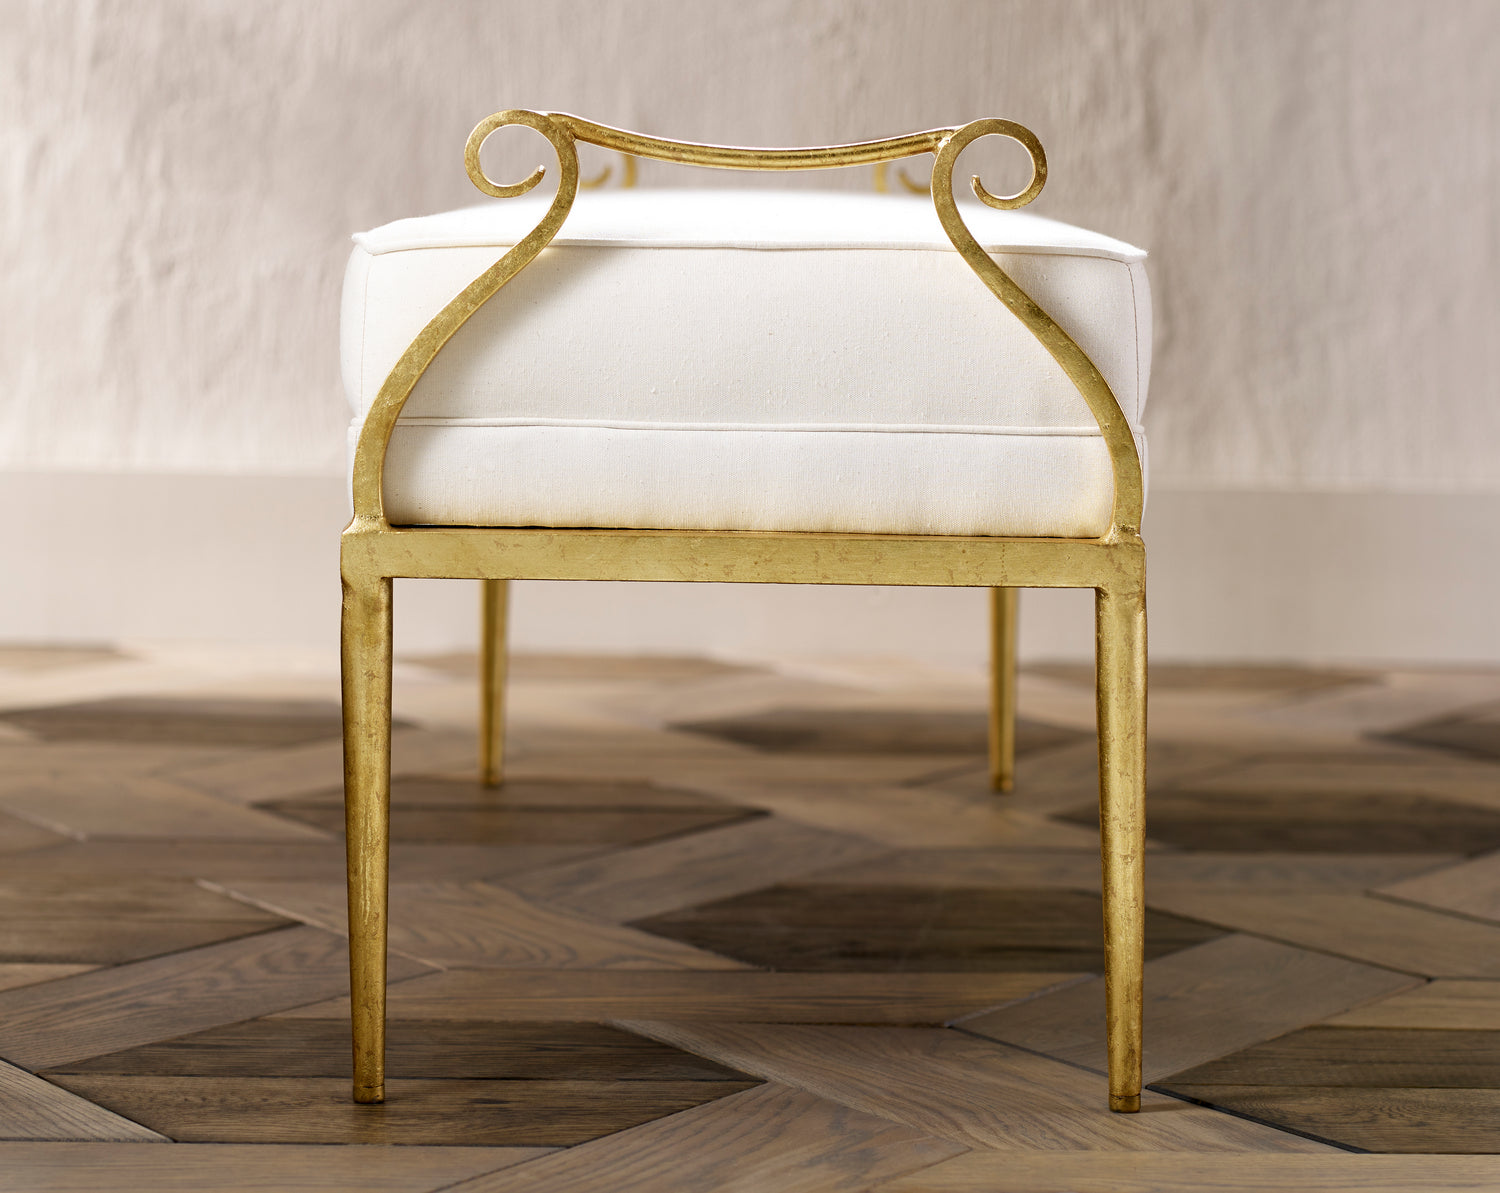 Ottoman from the Genevieve collection in Grecian Gold finish